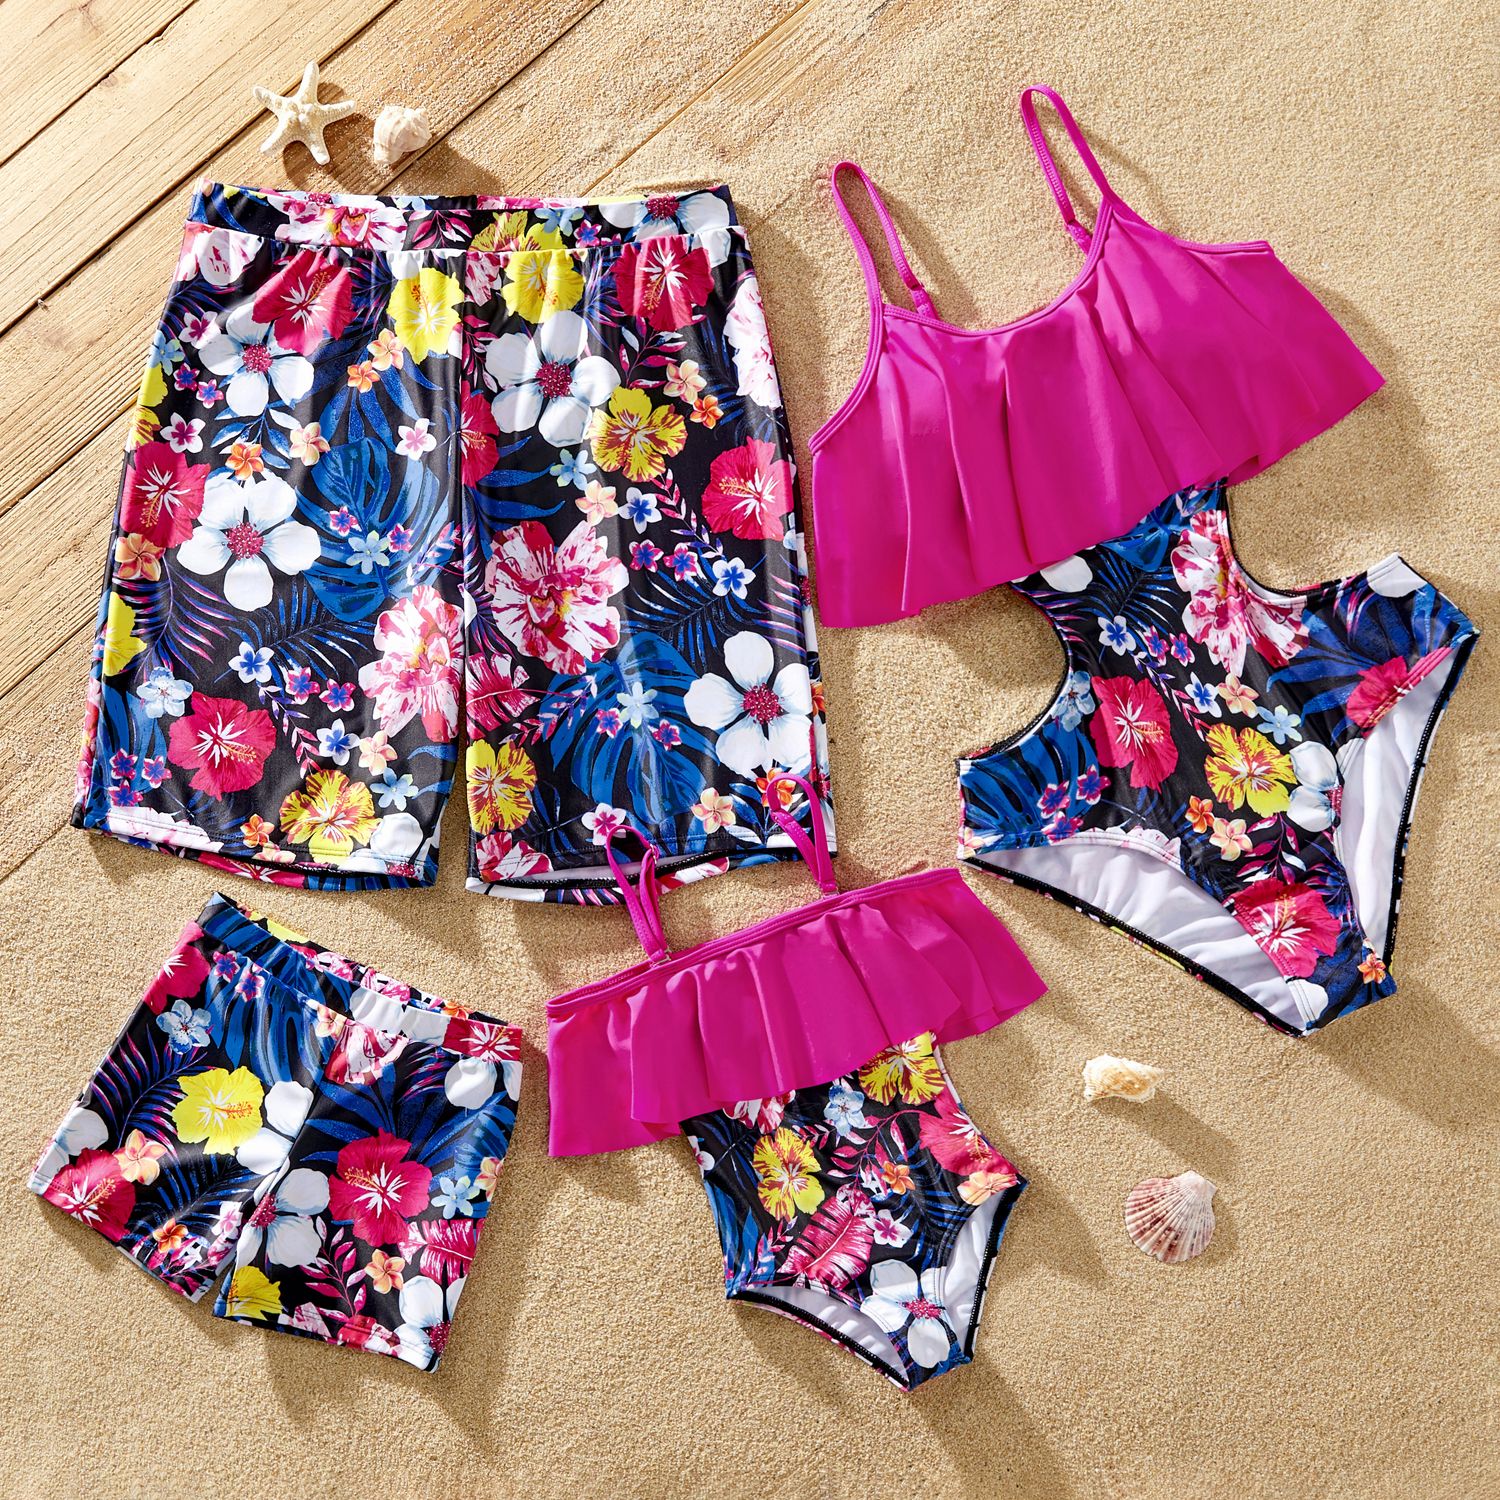 Family Matching Floral Print Ruffled One-piece Swimsuit Or Plant Print Swim Trunks Shorts